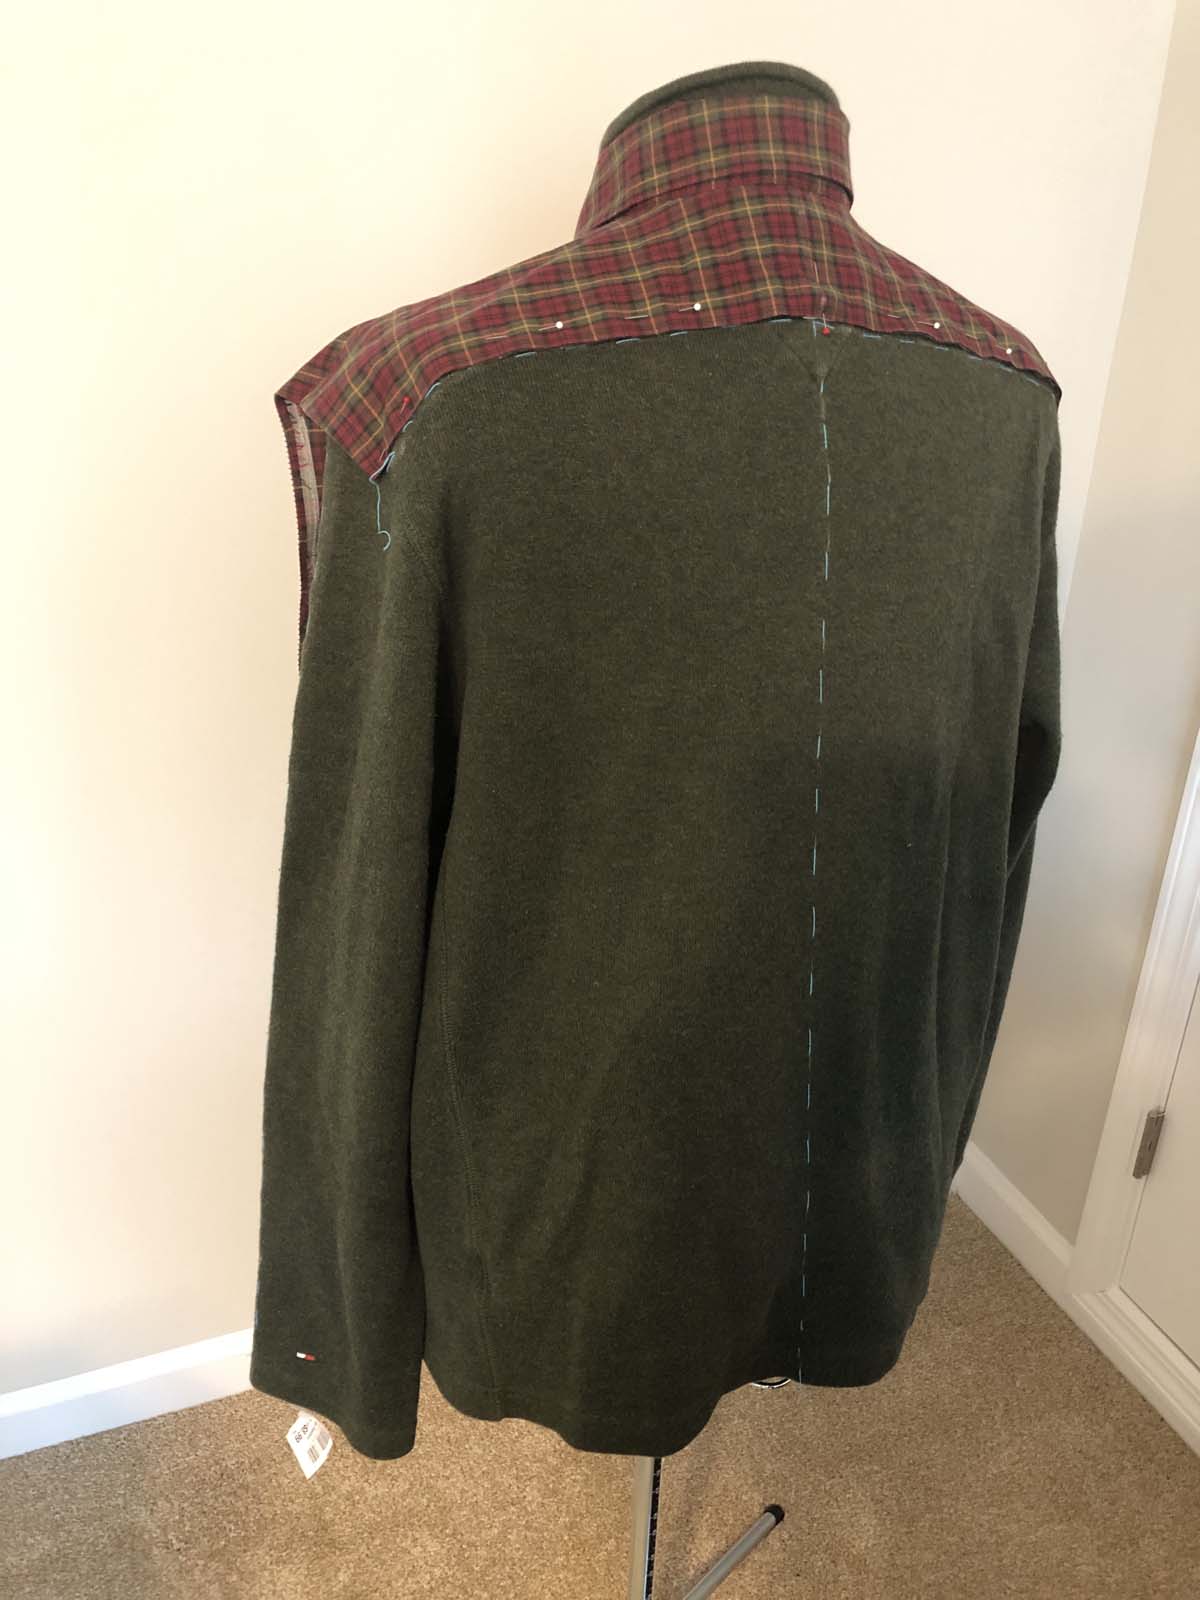 Red plaid shirt laid on top of olive green sweater on dress from